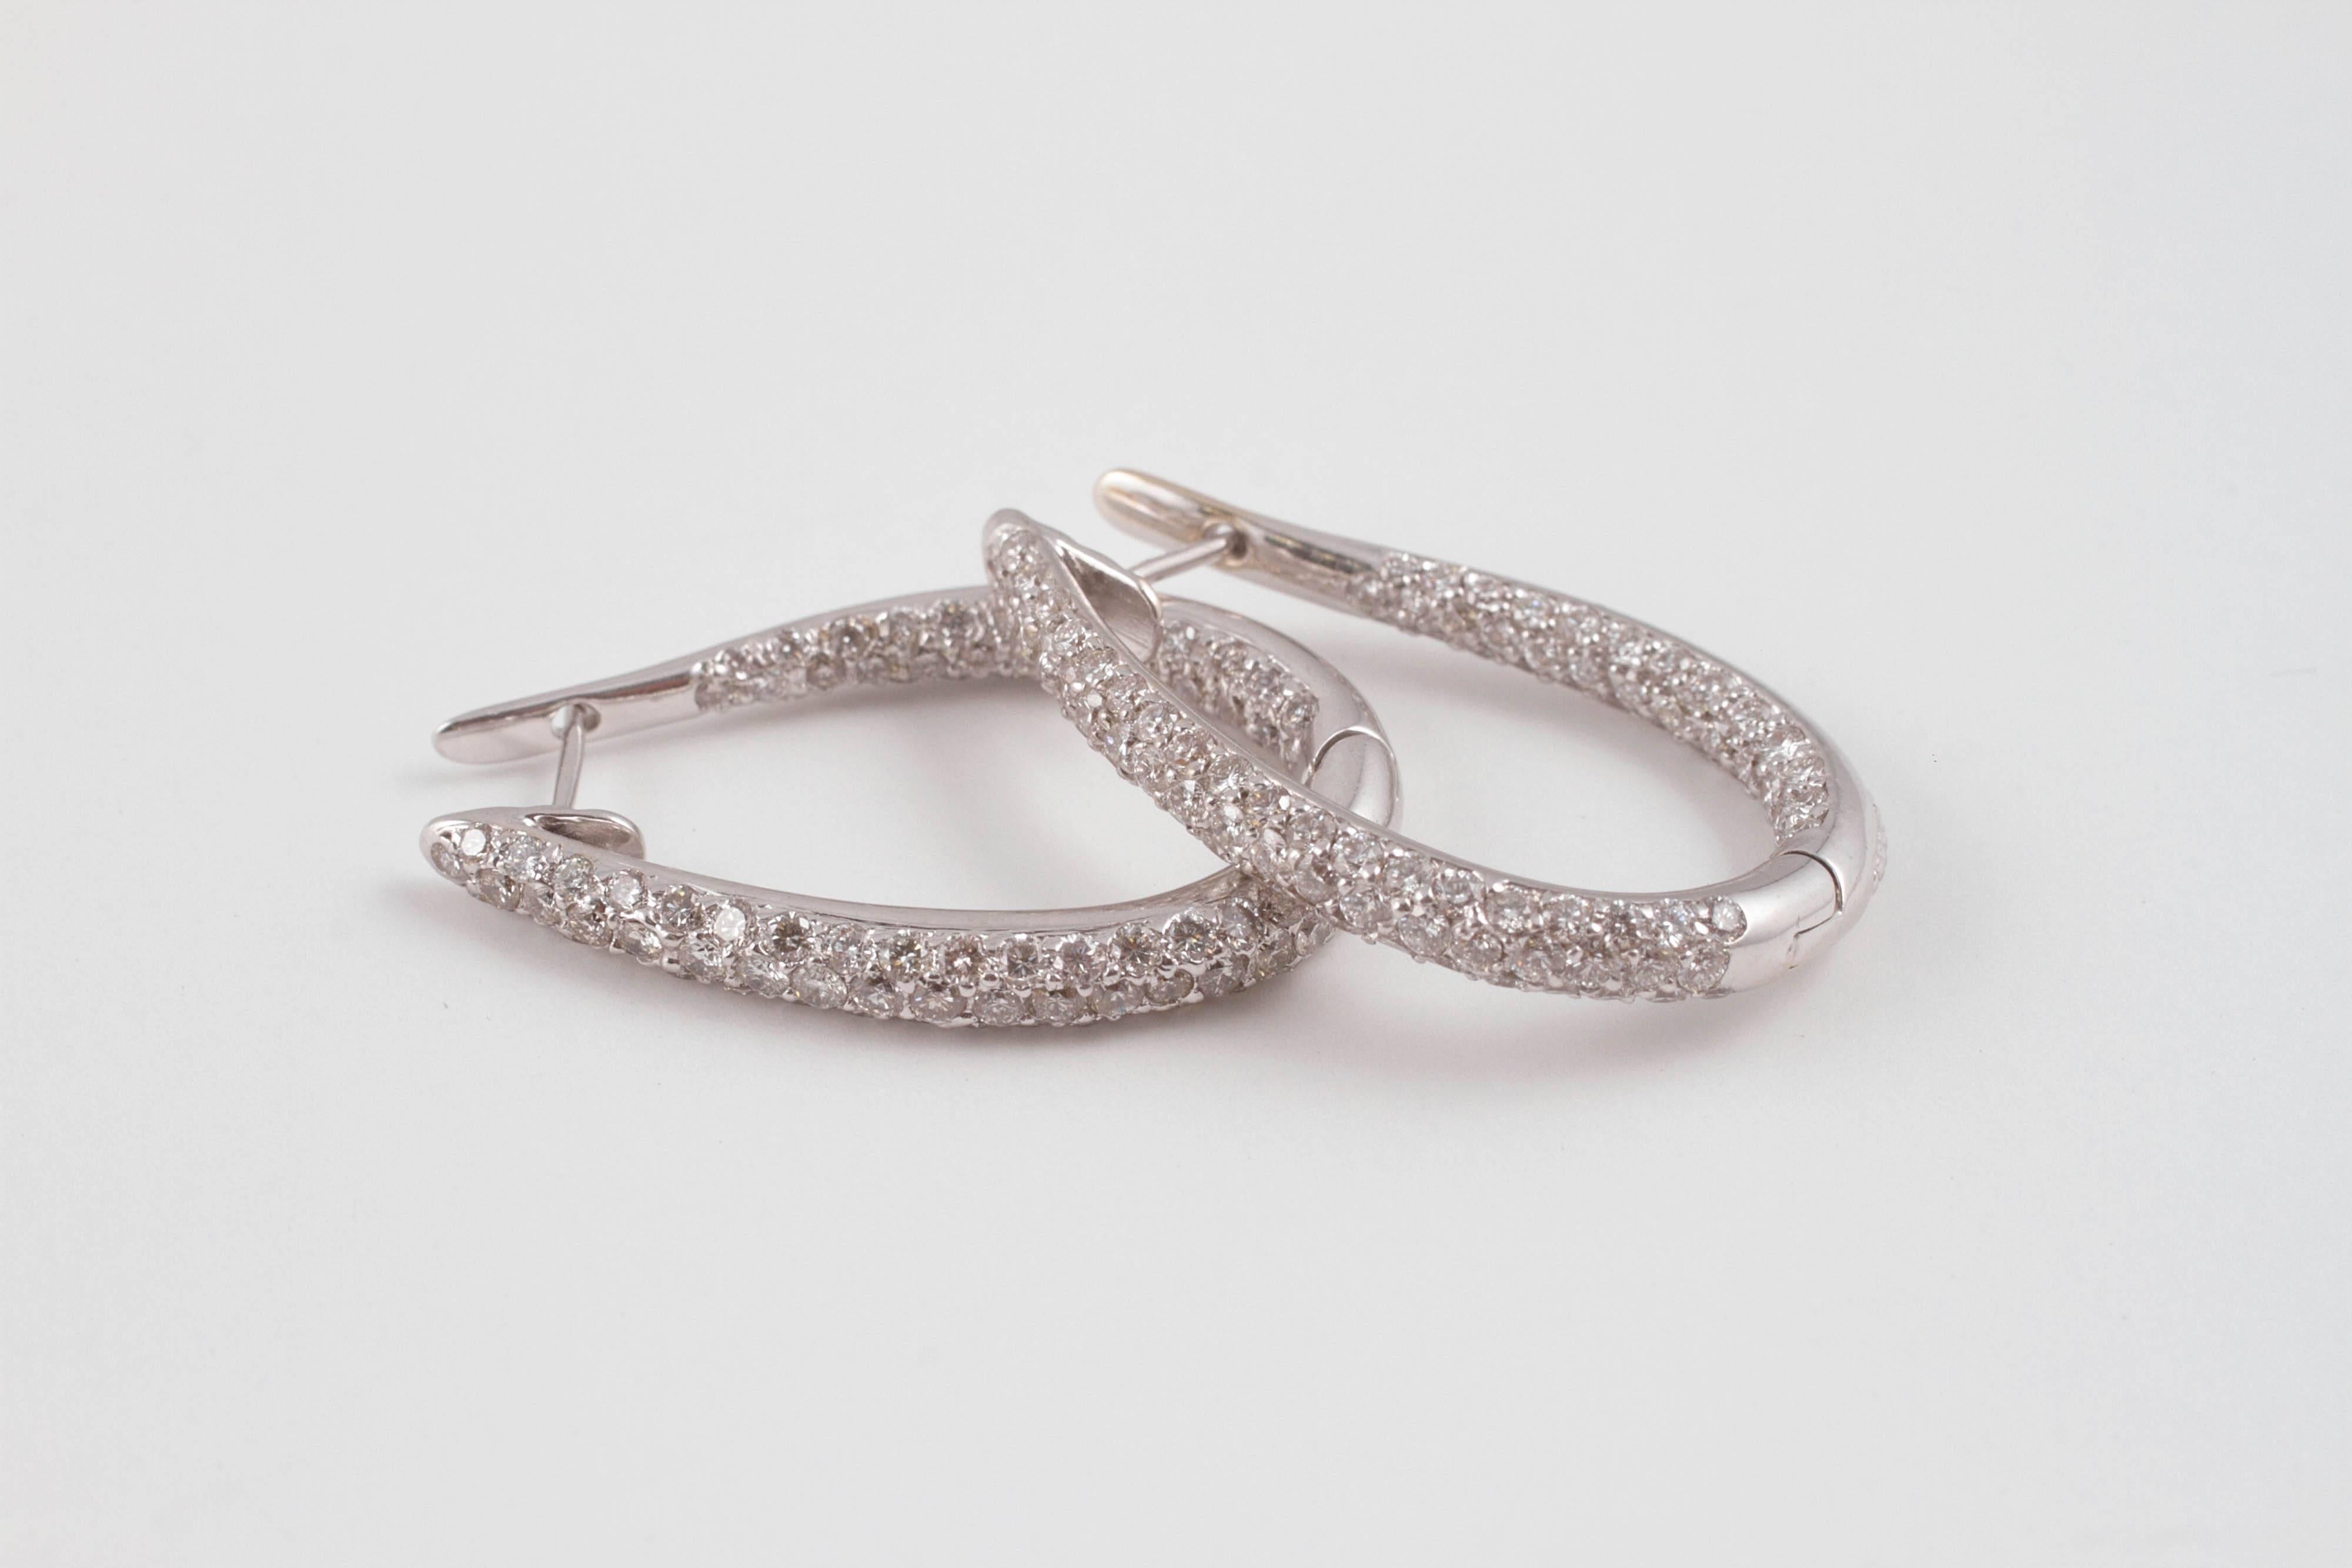 In an elongated oval form, with 1.75 cts of diamonds. Each earring is about 1 1/2 inches in length.